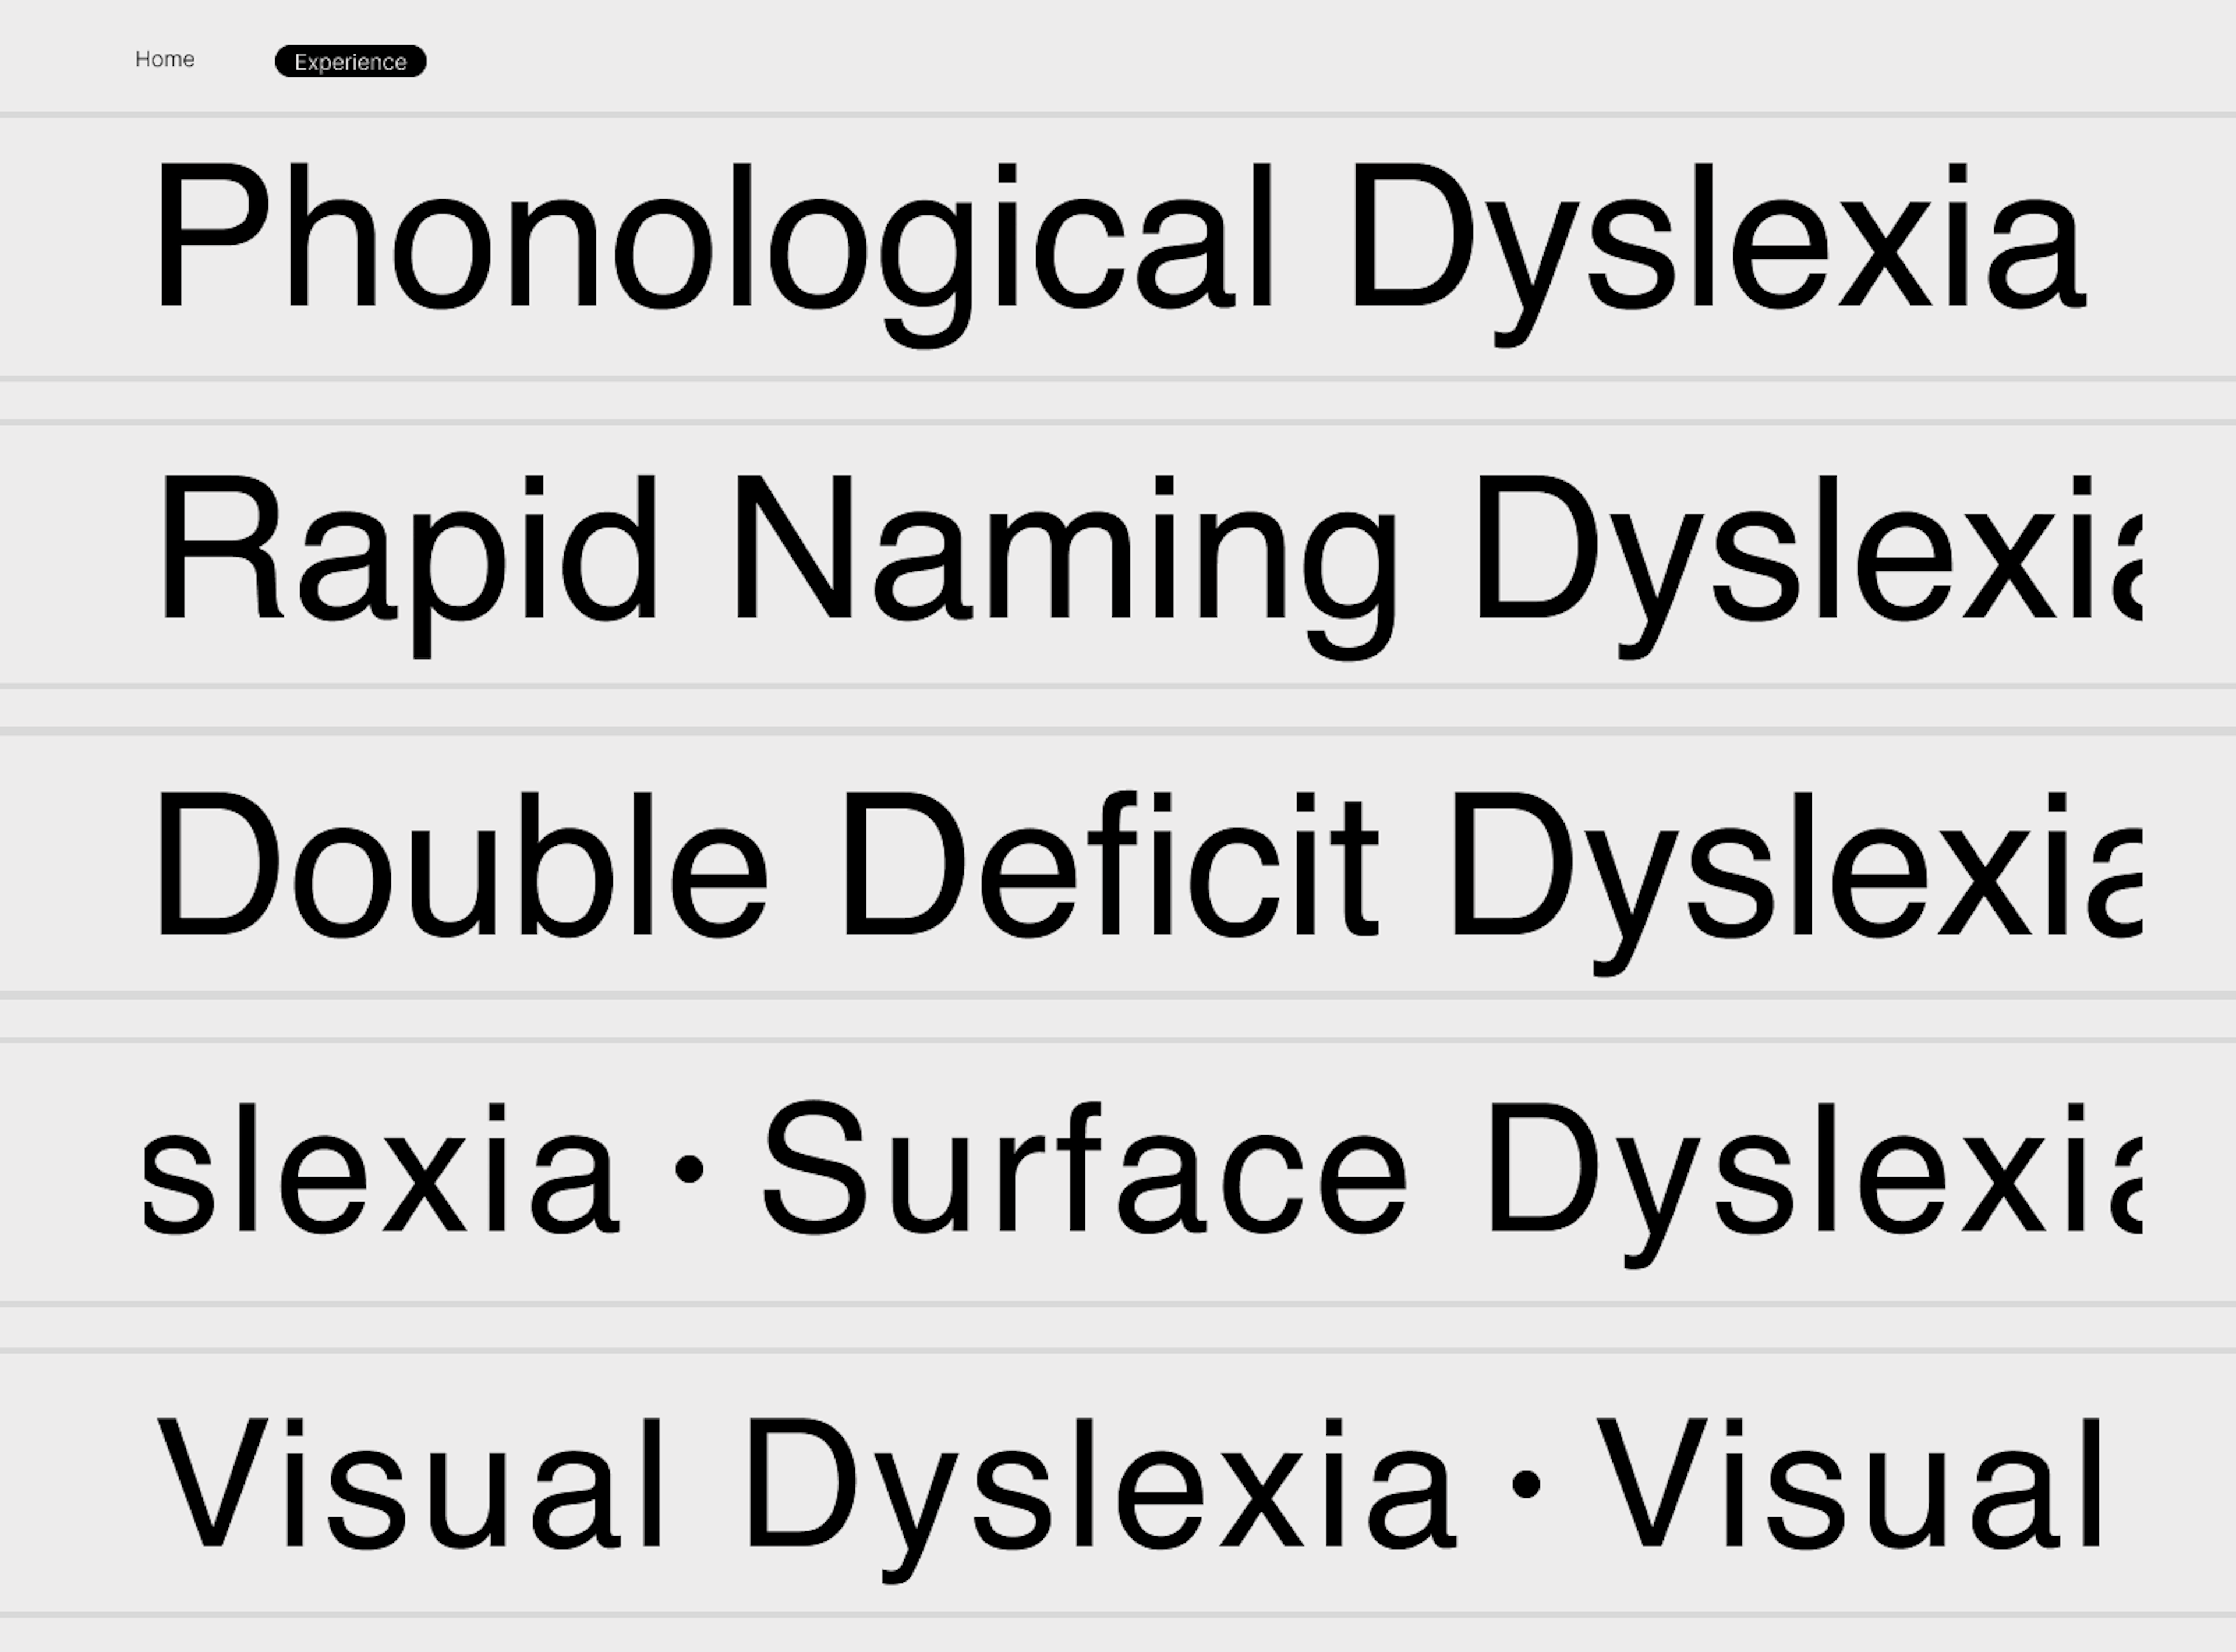 Picture listing the different types of dyslexia image-skeleton